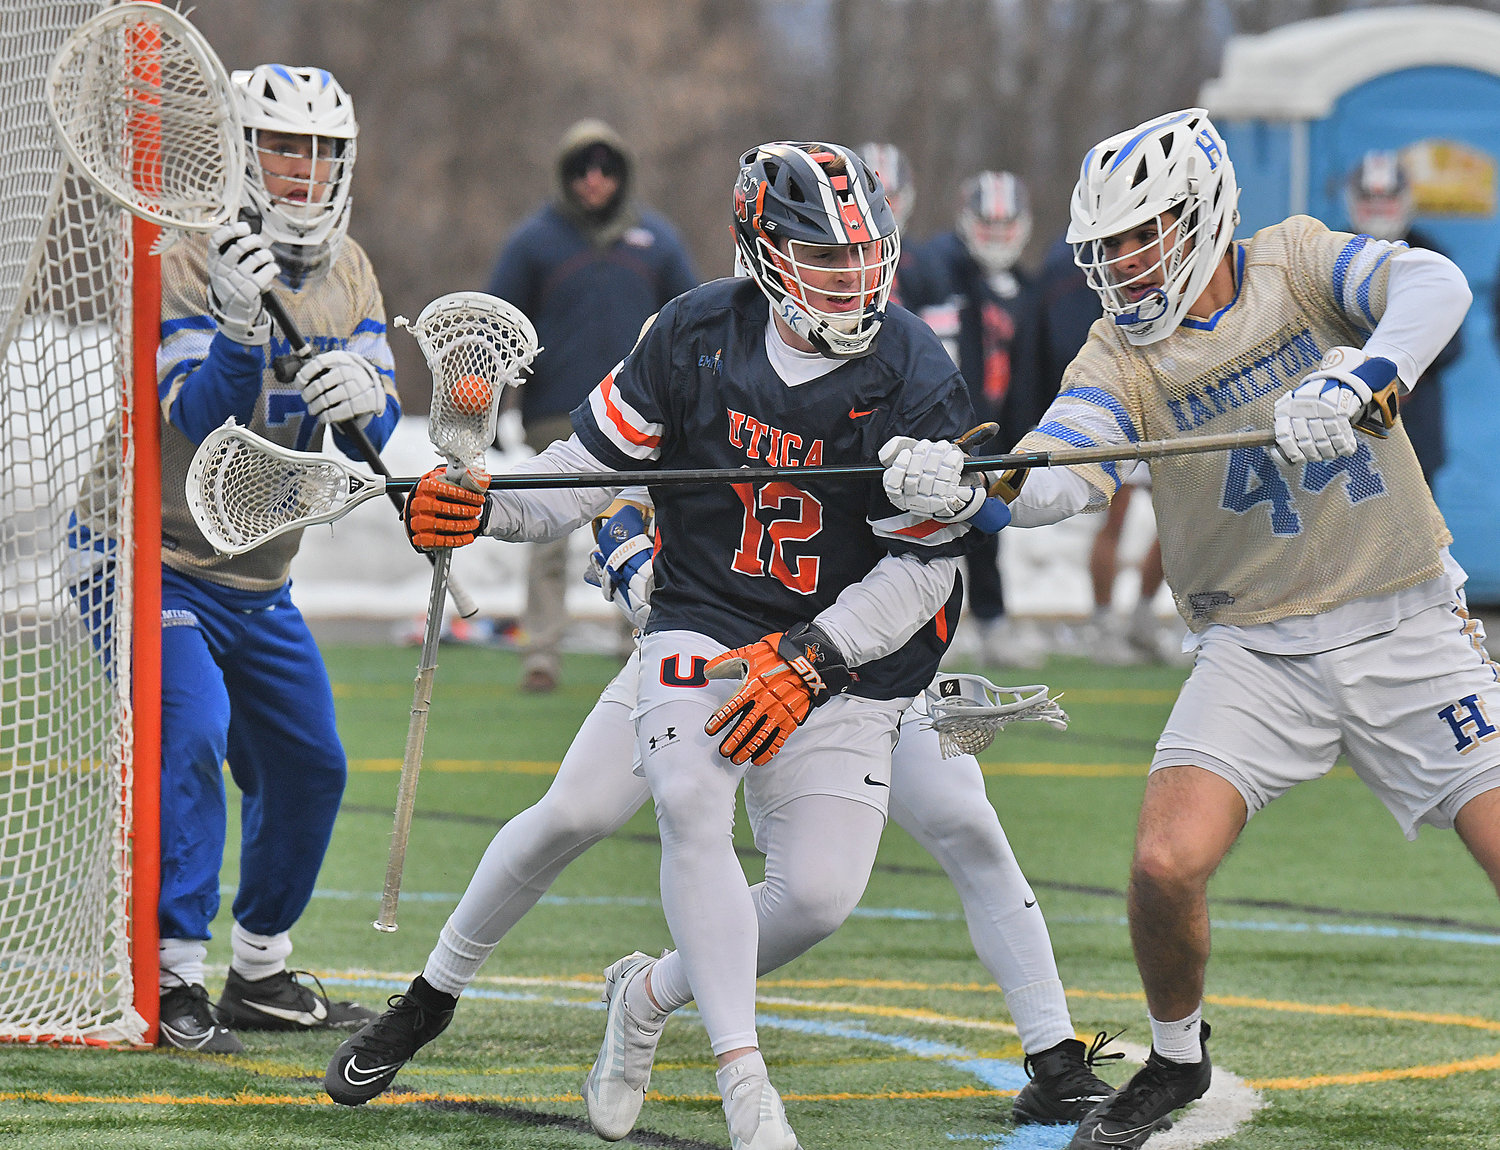 TRIPLE-TEAMED — Utica Univeristy's Sam Serrano is defended by Hamilton College's Dominic Mauretti, right, and Cole Johnson (behind) with Seamus Fagan in goal on Tuesday at Hamilton College's Withiam Field in Clinton. Serrano scored a pair of goals, but Hamilton rolled to a 20-5 win in the 23rd playing of the Contineer Cup.